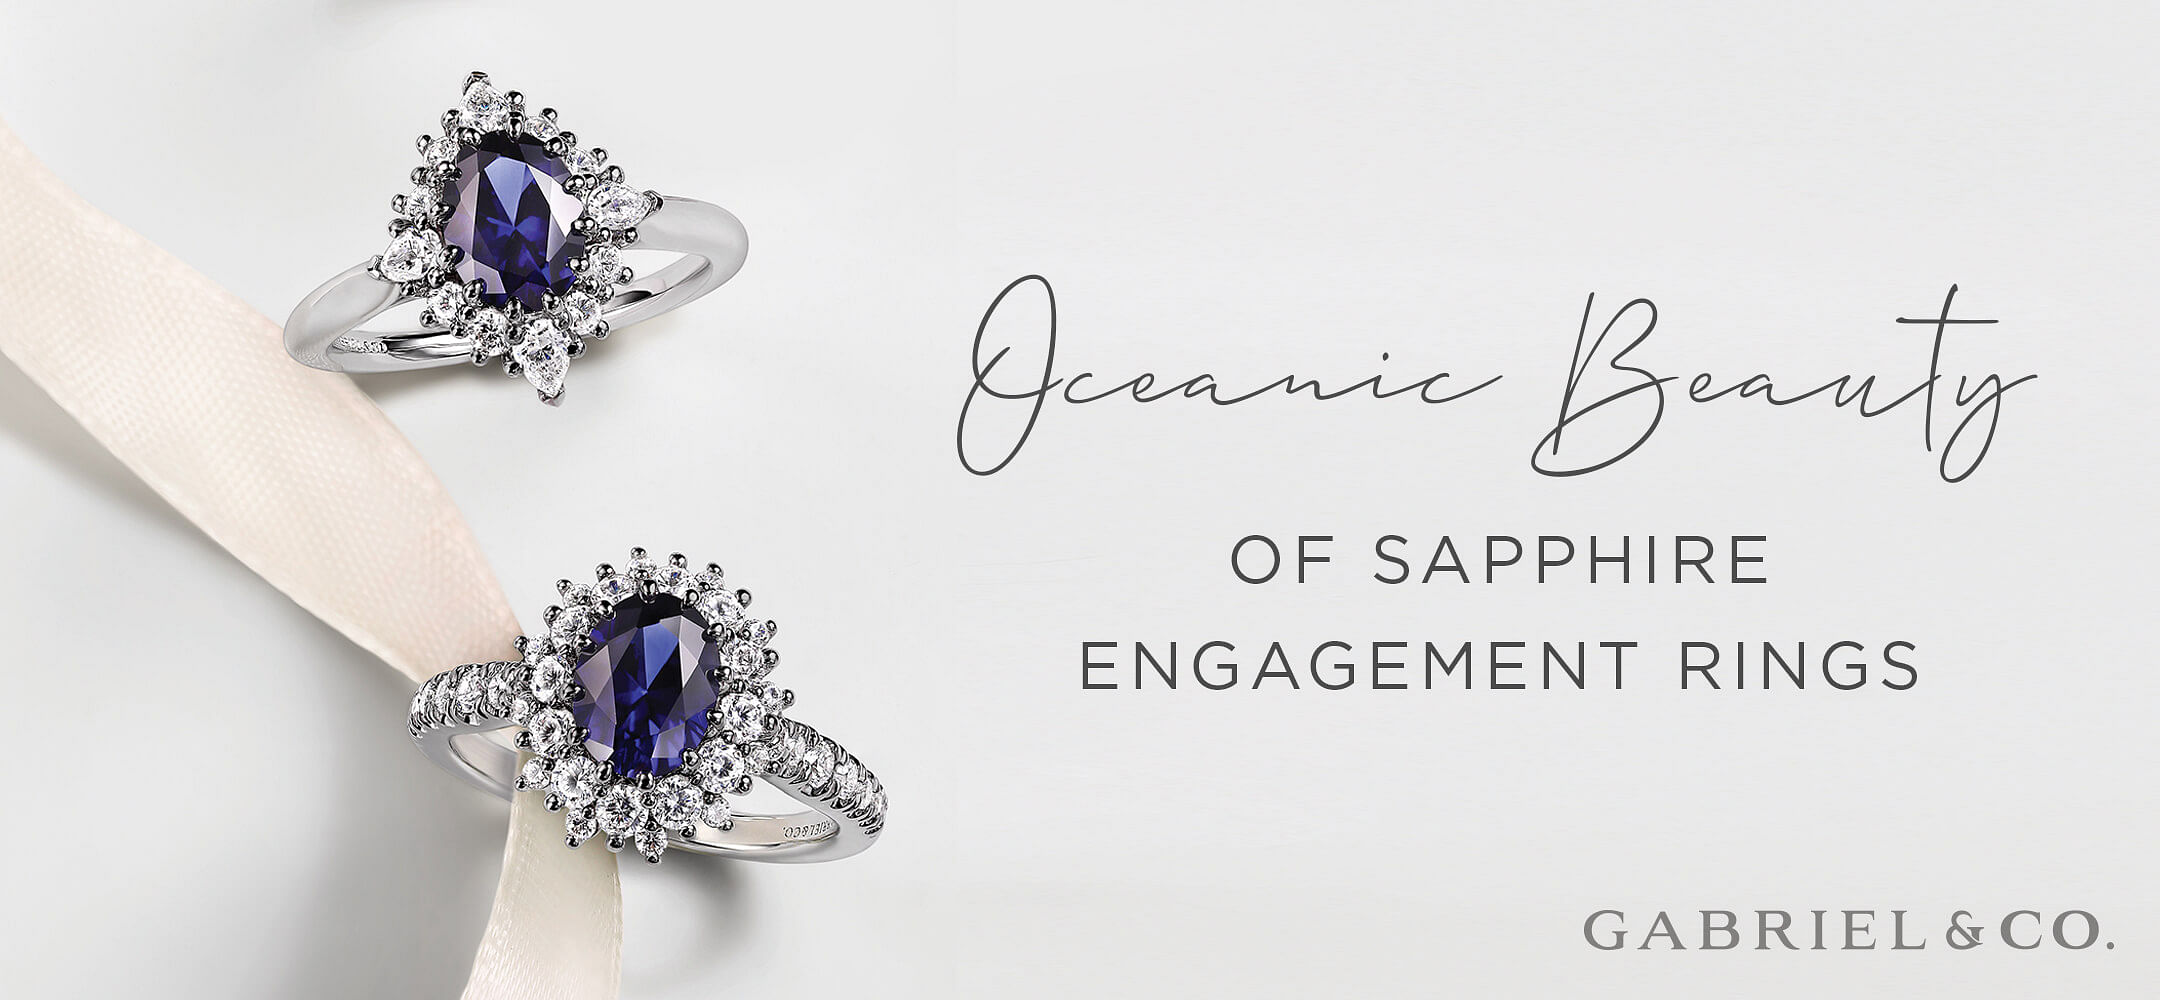 Gabriel & Co. Fine Jewelry and Diamond Engagement Rings on Instagram:  